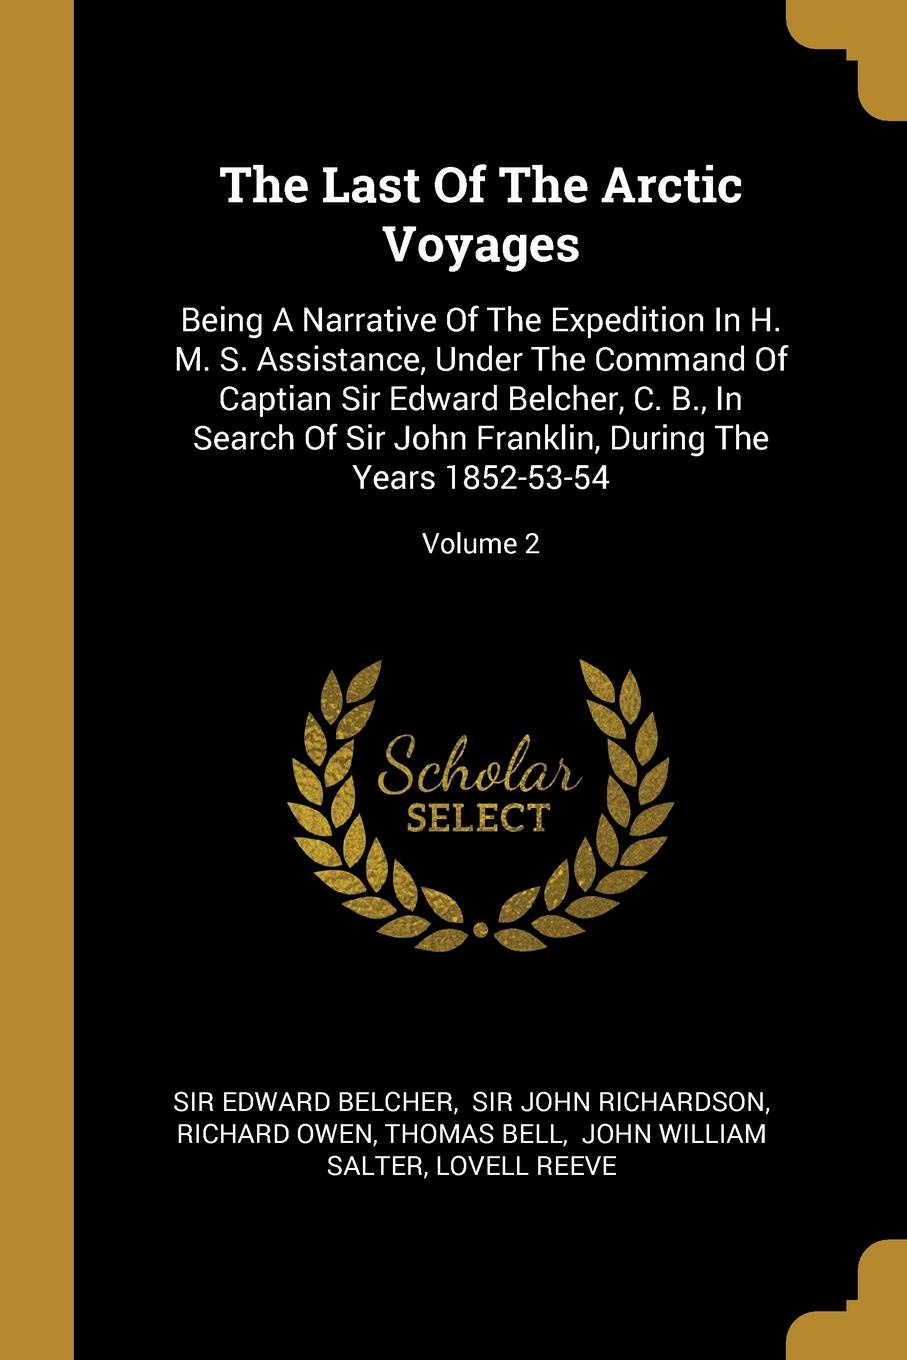 The Last Of The Arctic Voyages. Being A Narrative Of The Expedition In H. M. S. Assistance, Under The Command Of Captian Sir Edward Belcher, C. B., In Search Of Sir John Franklin, During The Years 1852-53-54; Volume 2